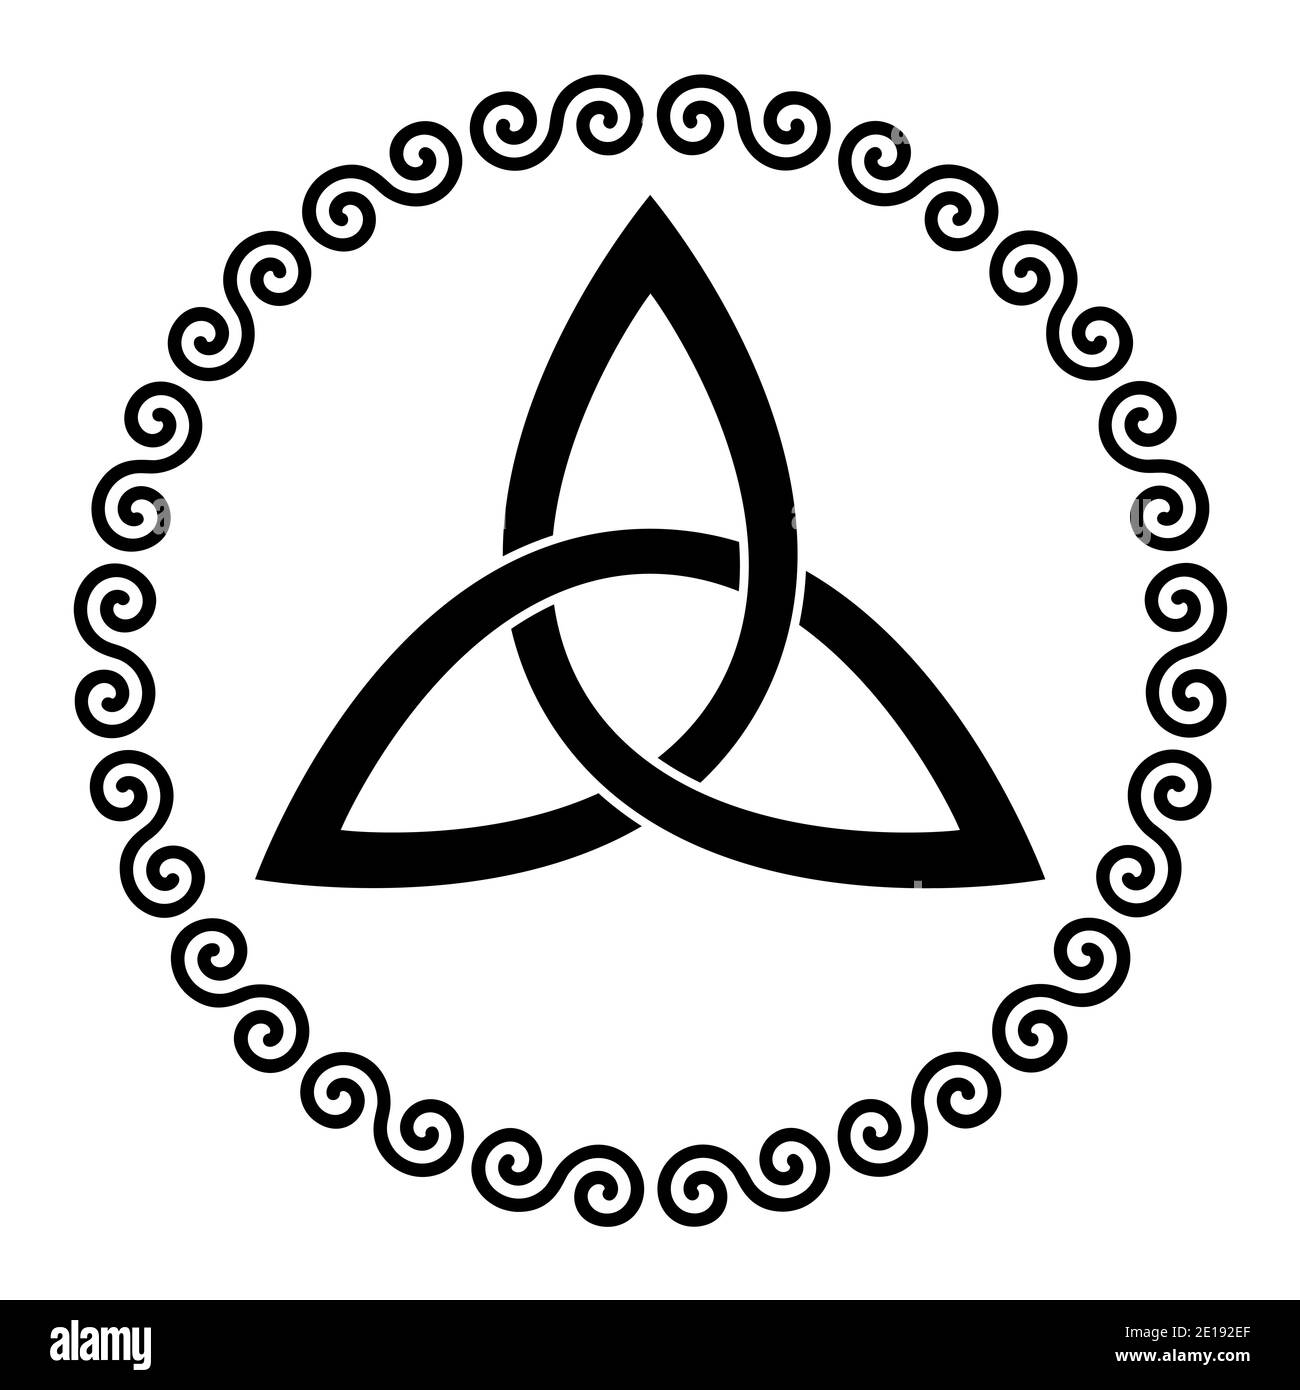 Triquetra, Celtic triangle knot in a circle frame shaped by double spirals. Basket wave knot, used in ancient Christian ornamentation. Stock Photo